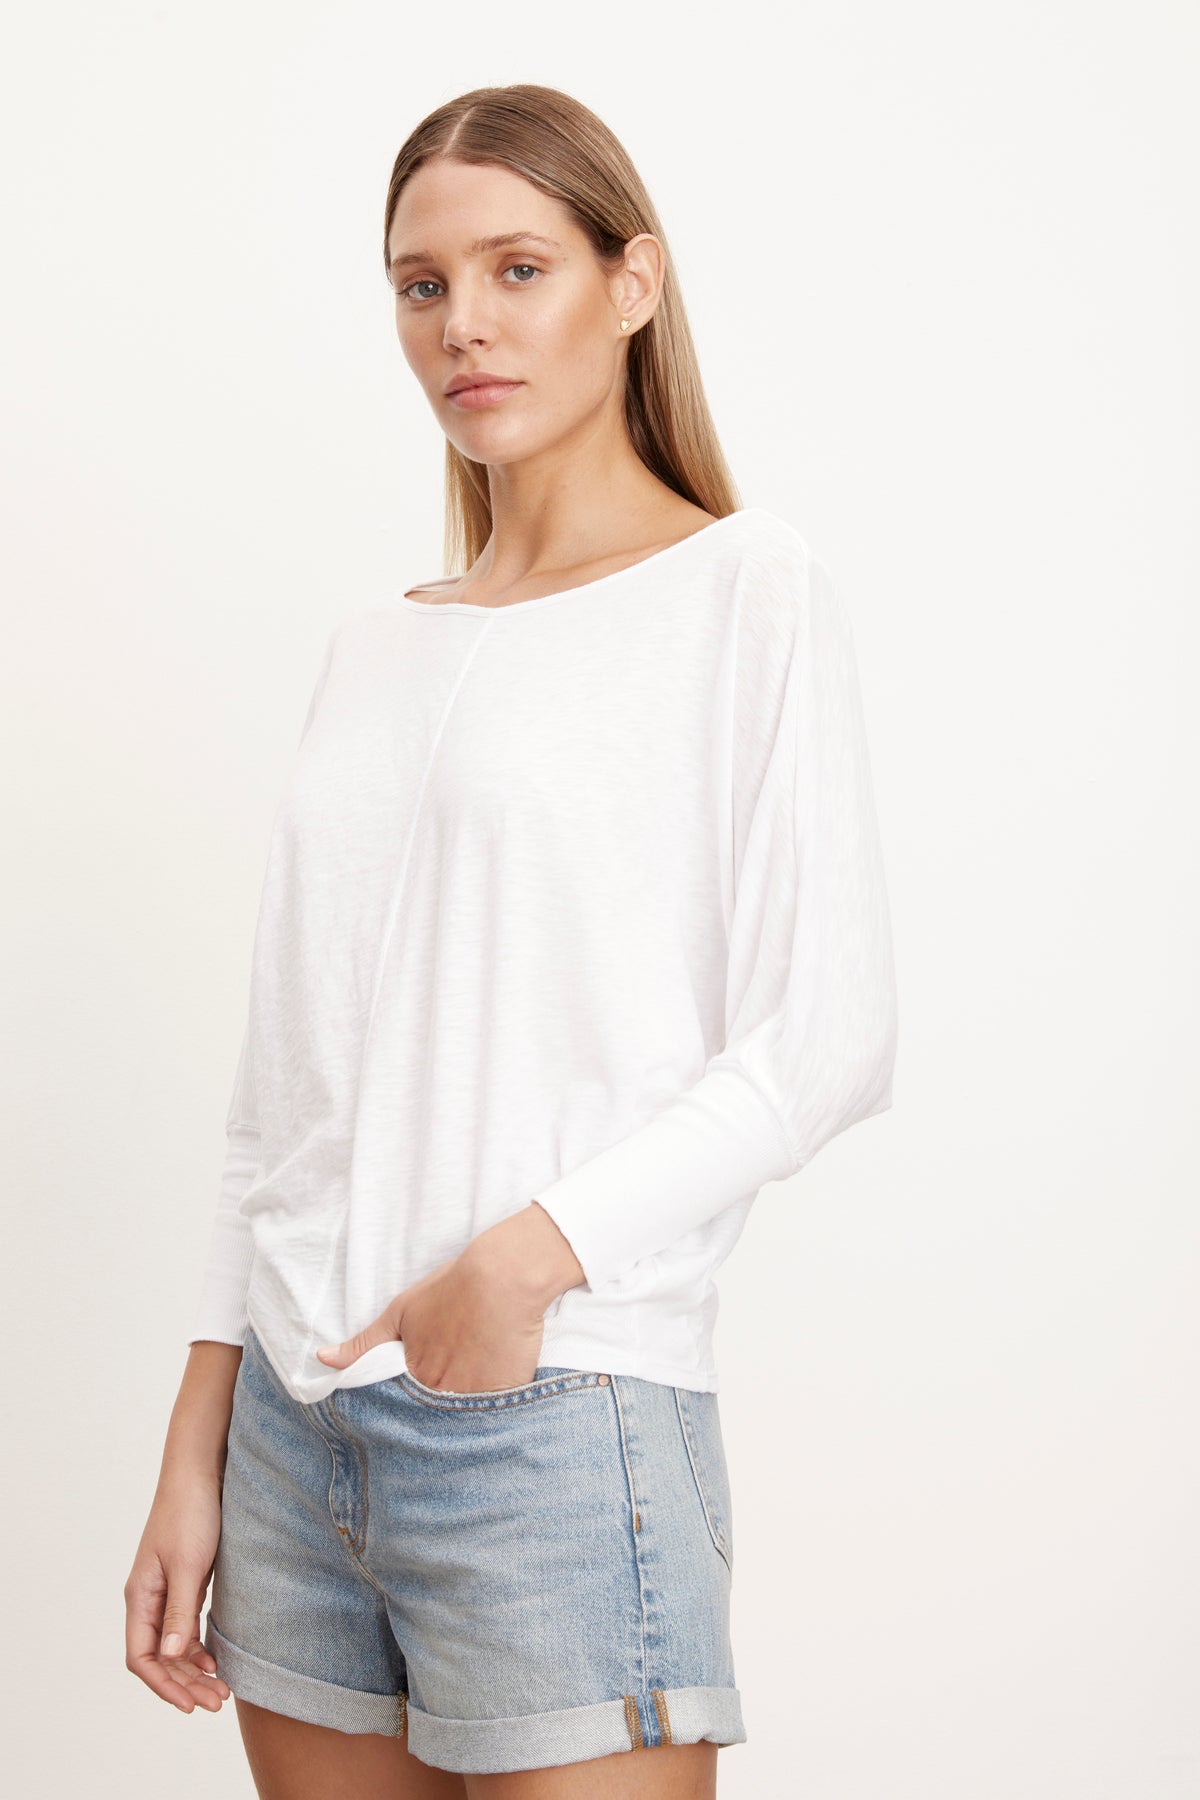   Woman wearing Joss Tee in white with dolman sleeve and denim shorts, hand in front shorts pocket, 3/4 view 